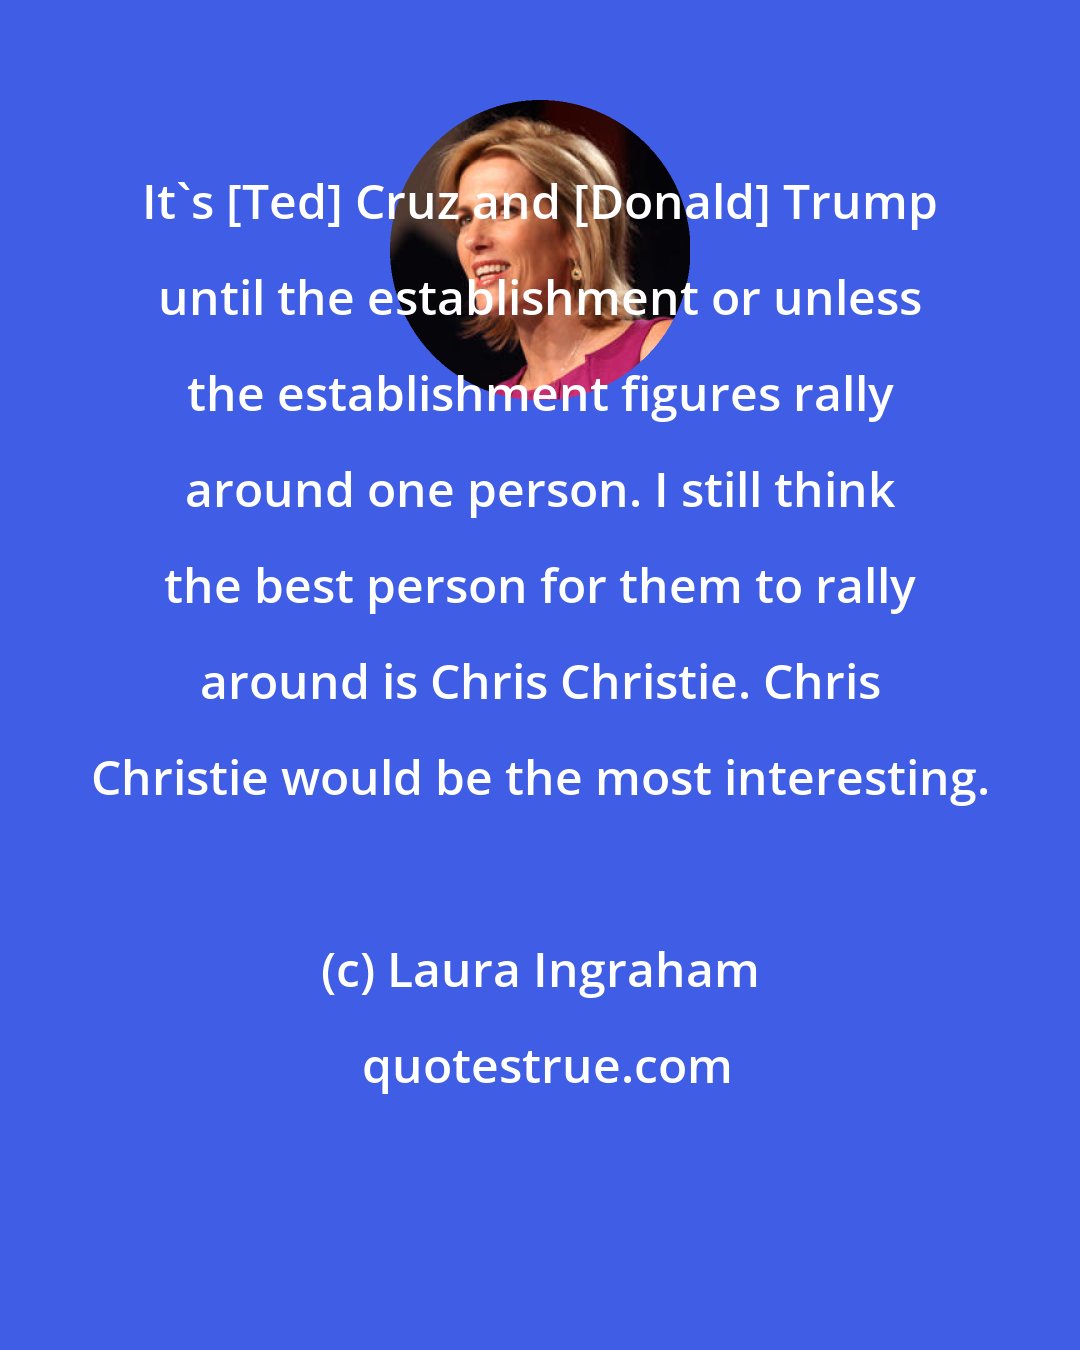 Laura Ingraham: It's [Ted] Cruz and [Donald] Trump until the establishment or unless the establishment figures rally around one person. I still think the best person for them to rally around is Chris Christie. Chris Christie would be the most interesting.